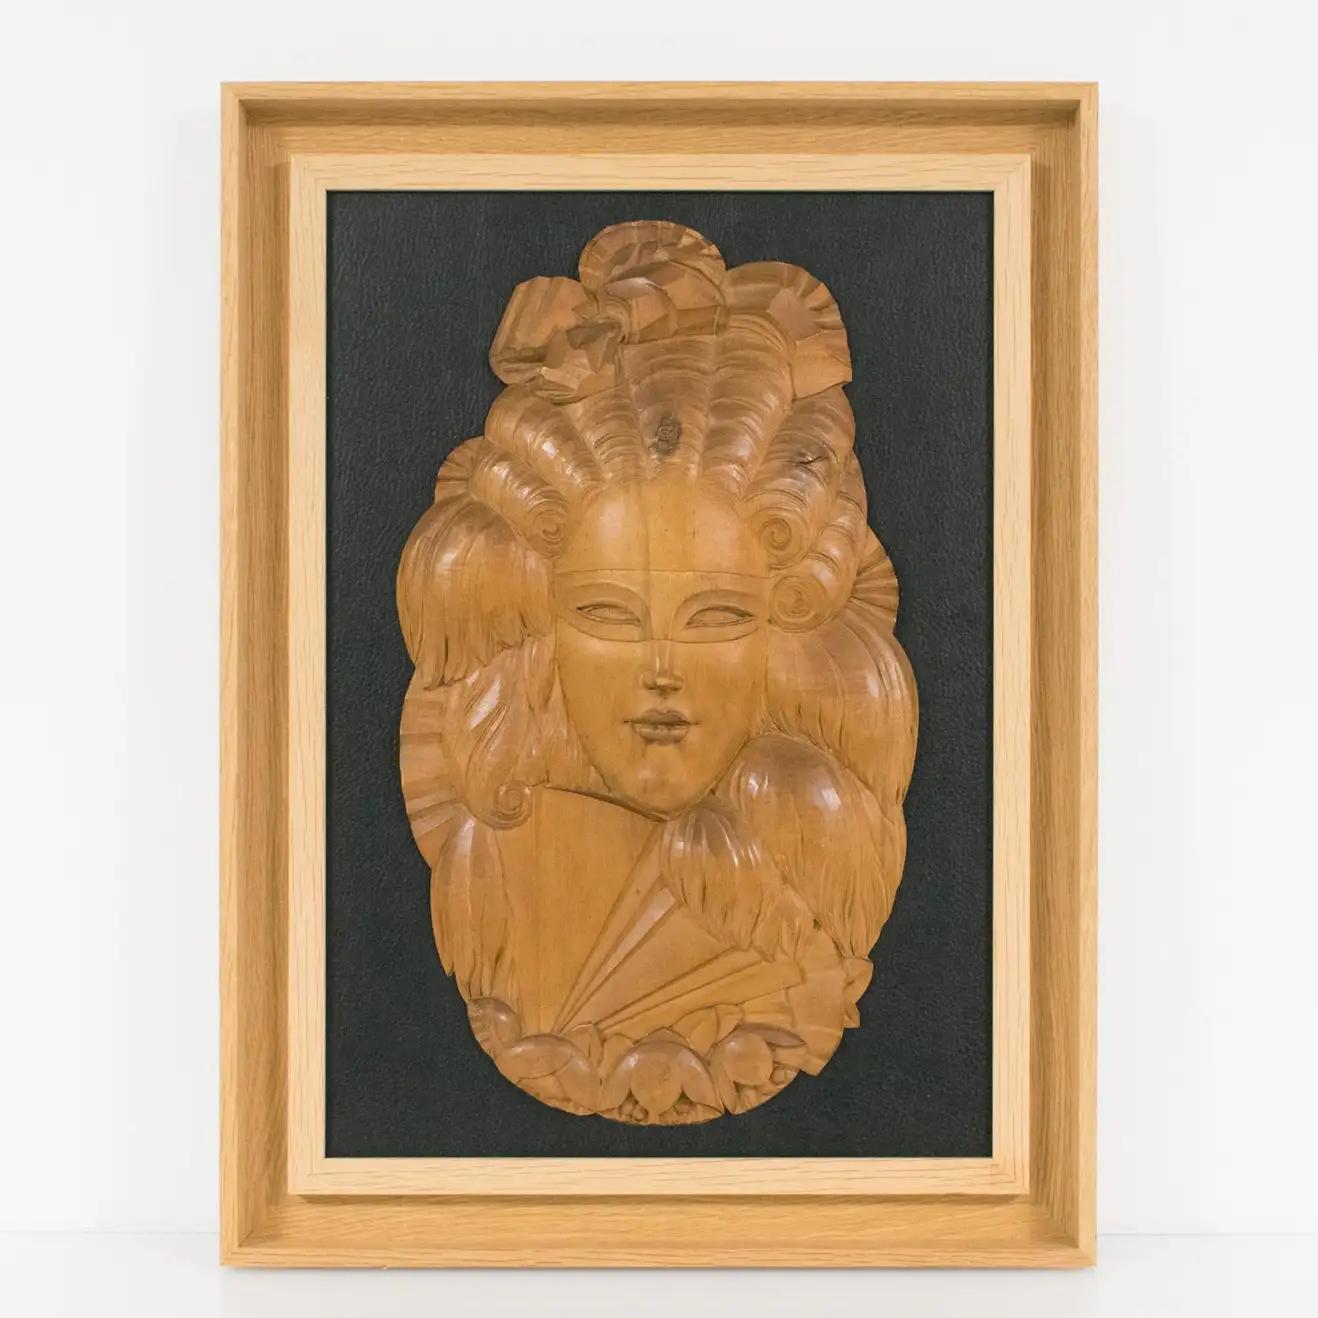 French Art Deco Handcrafted Wood Panel Wall Sculpture Venetian Mask, 1930s For Sale